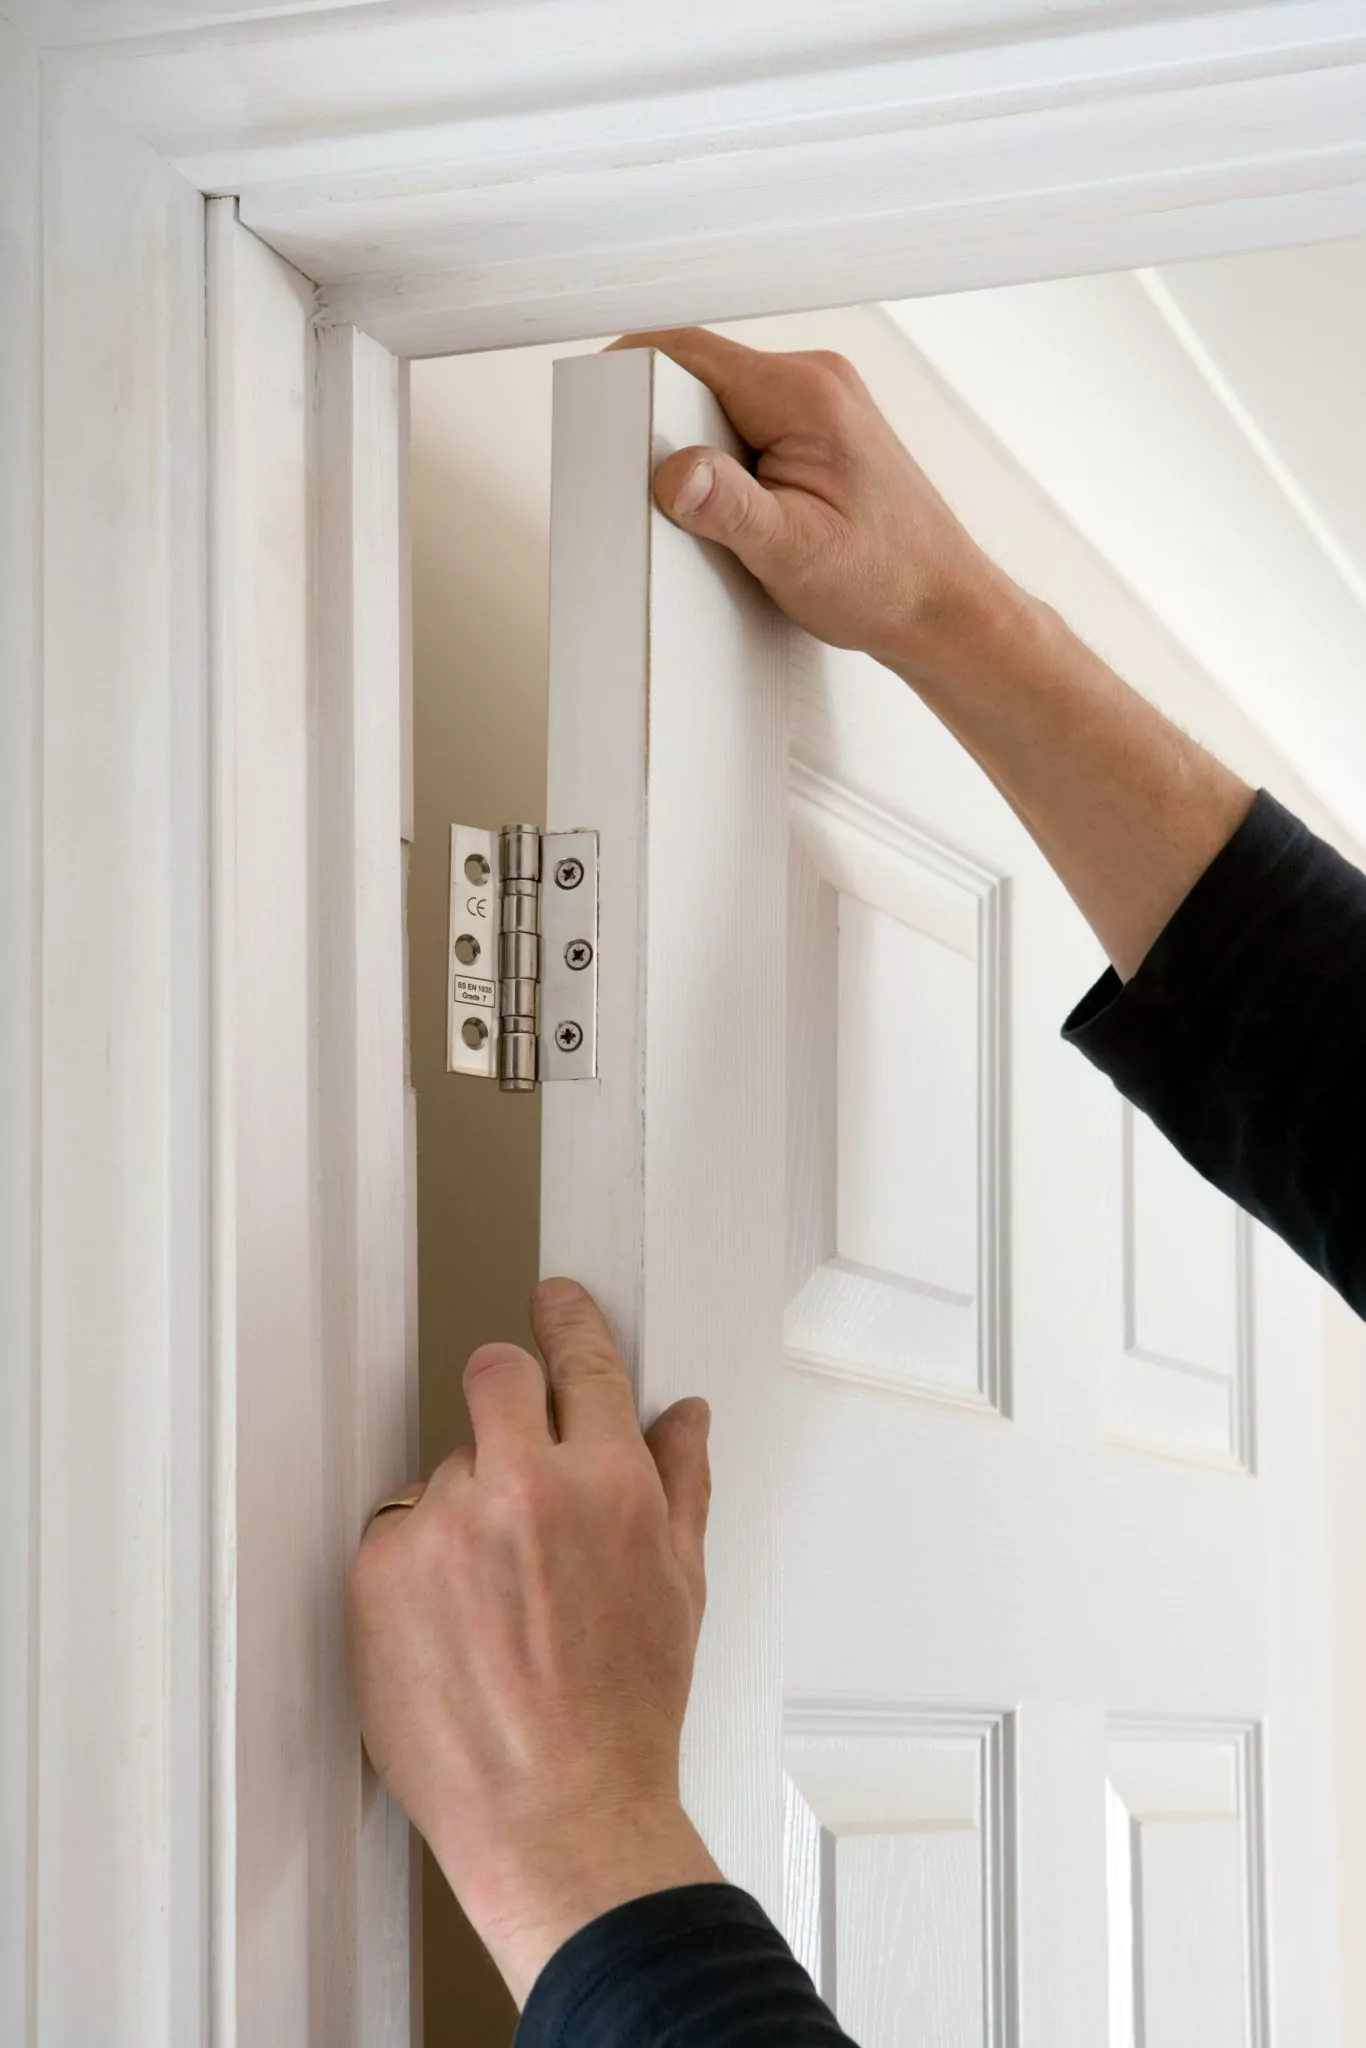 How To Fix A Door Frame How to Repair a Cracked Door Frame » The Money Pit